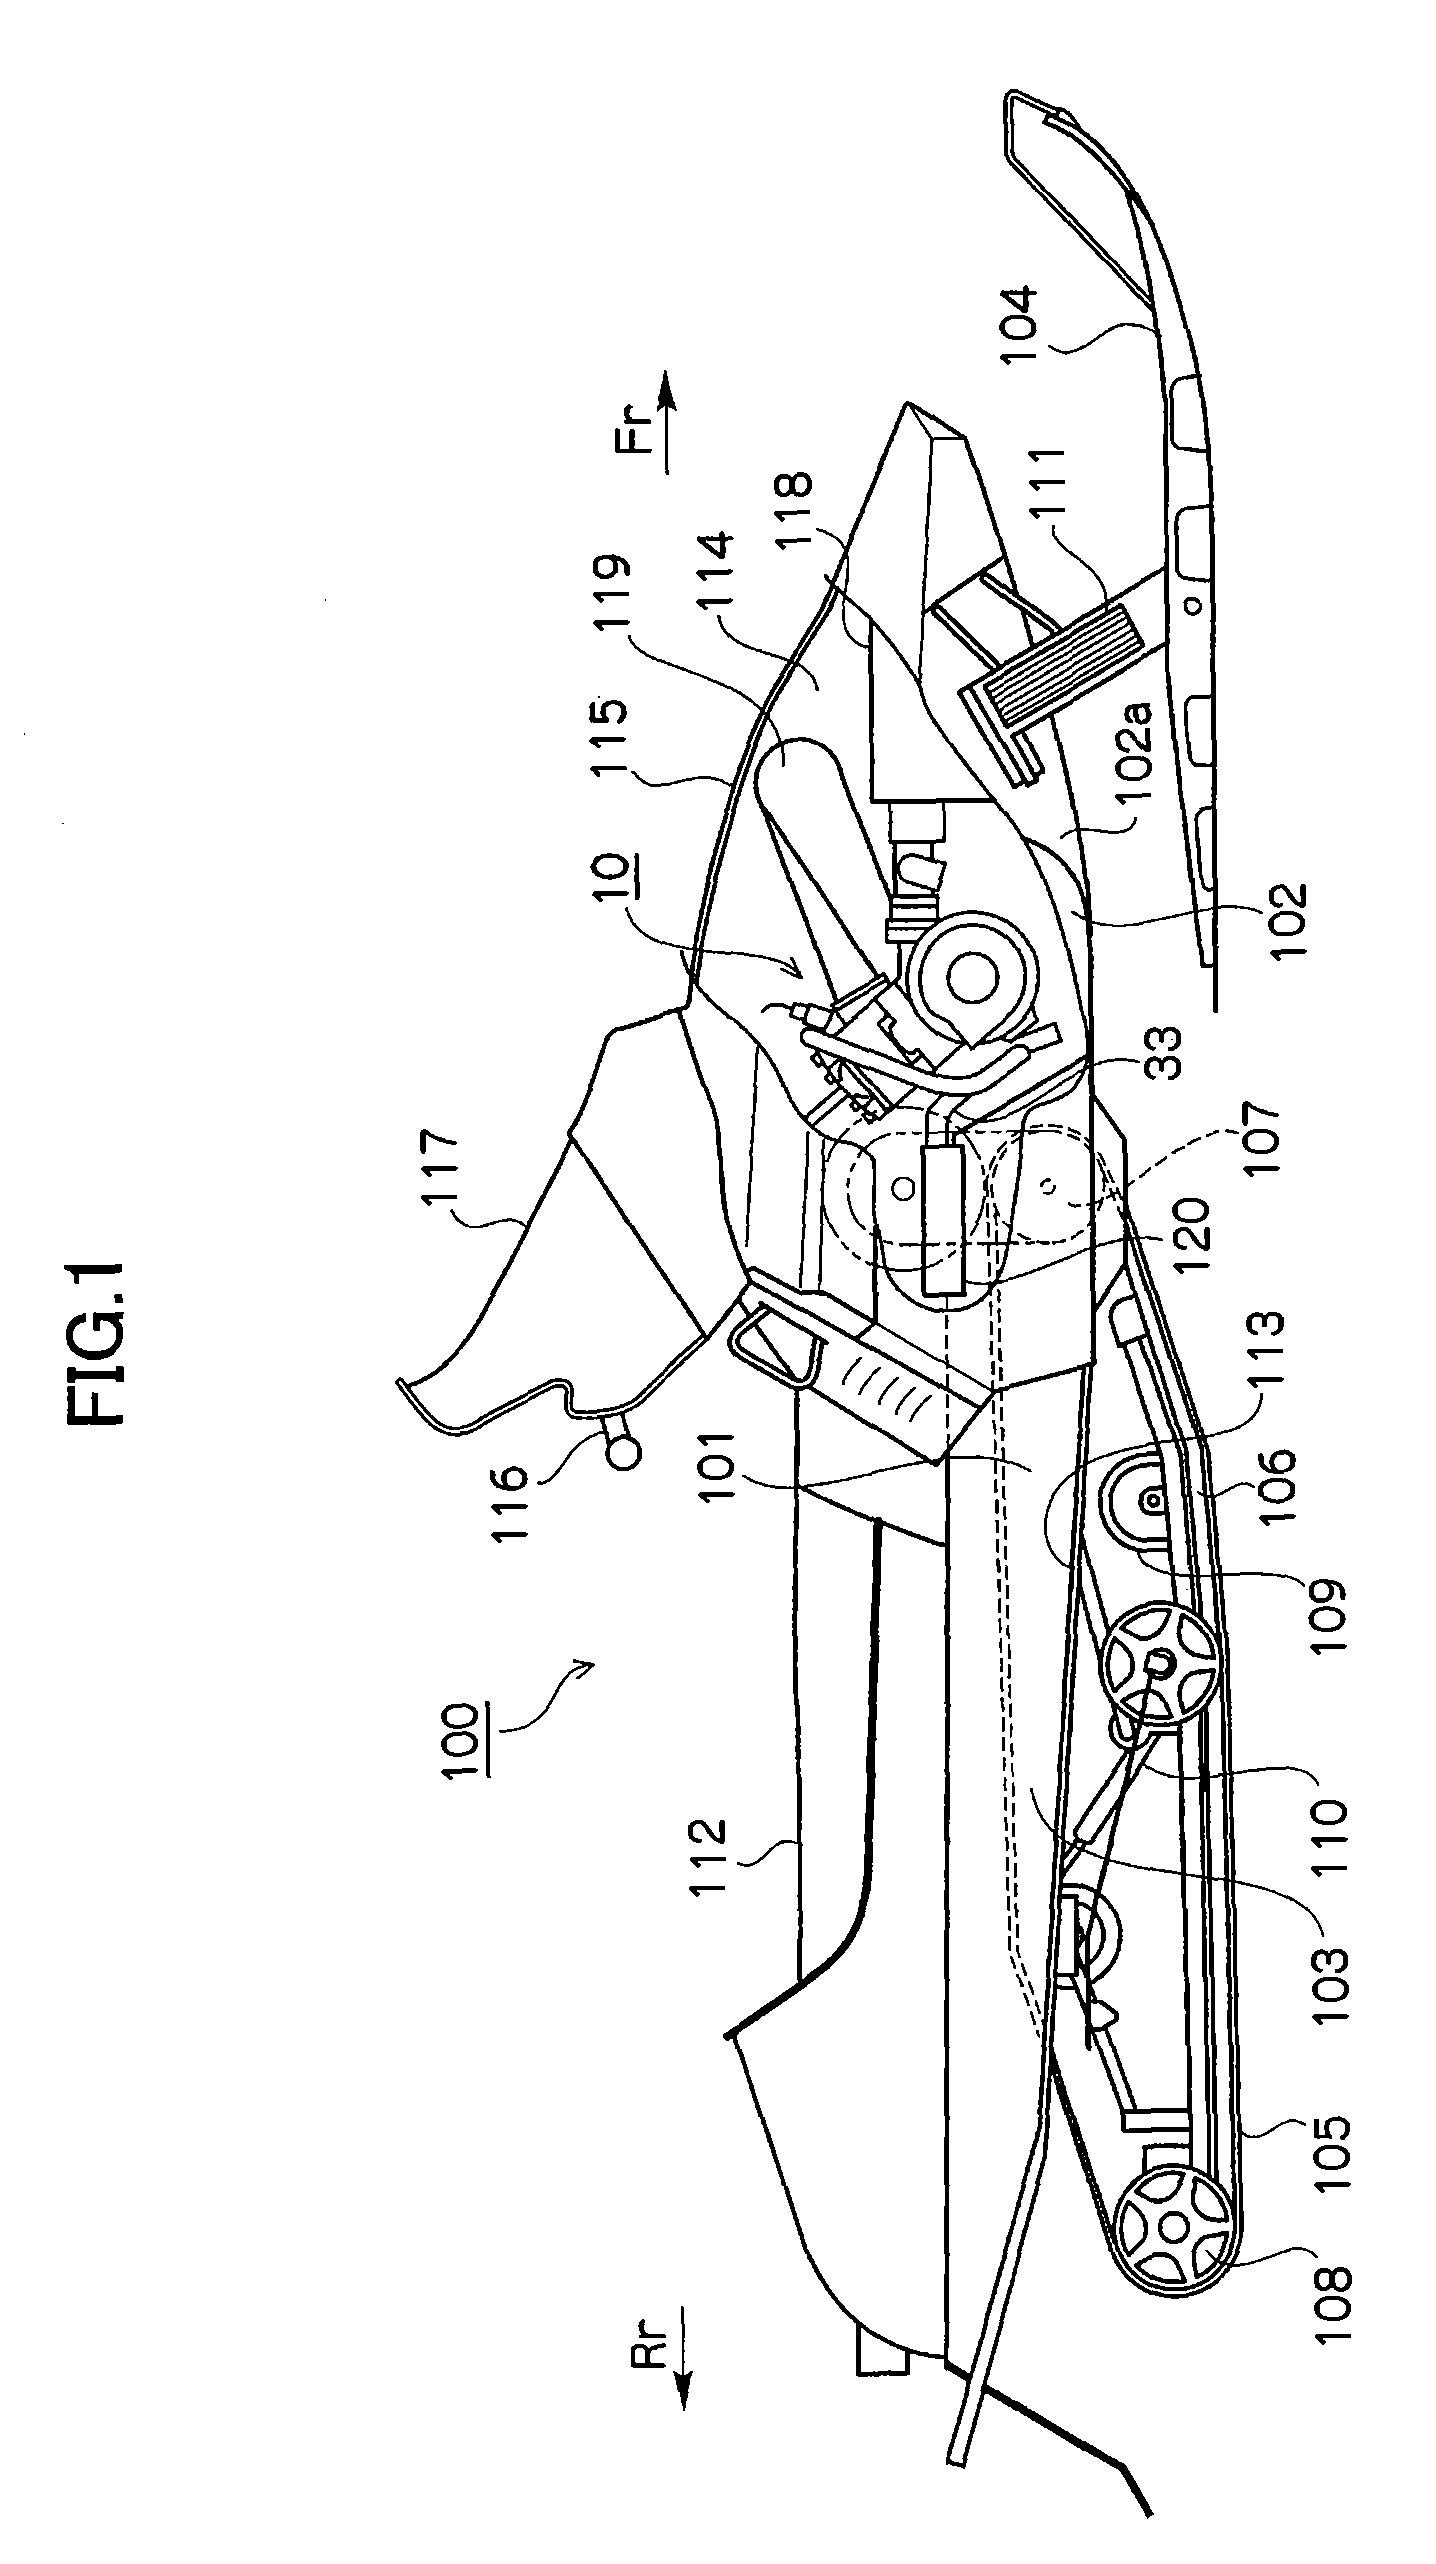 Water-cooled two-cycle engine